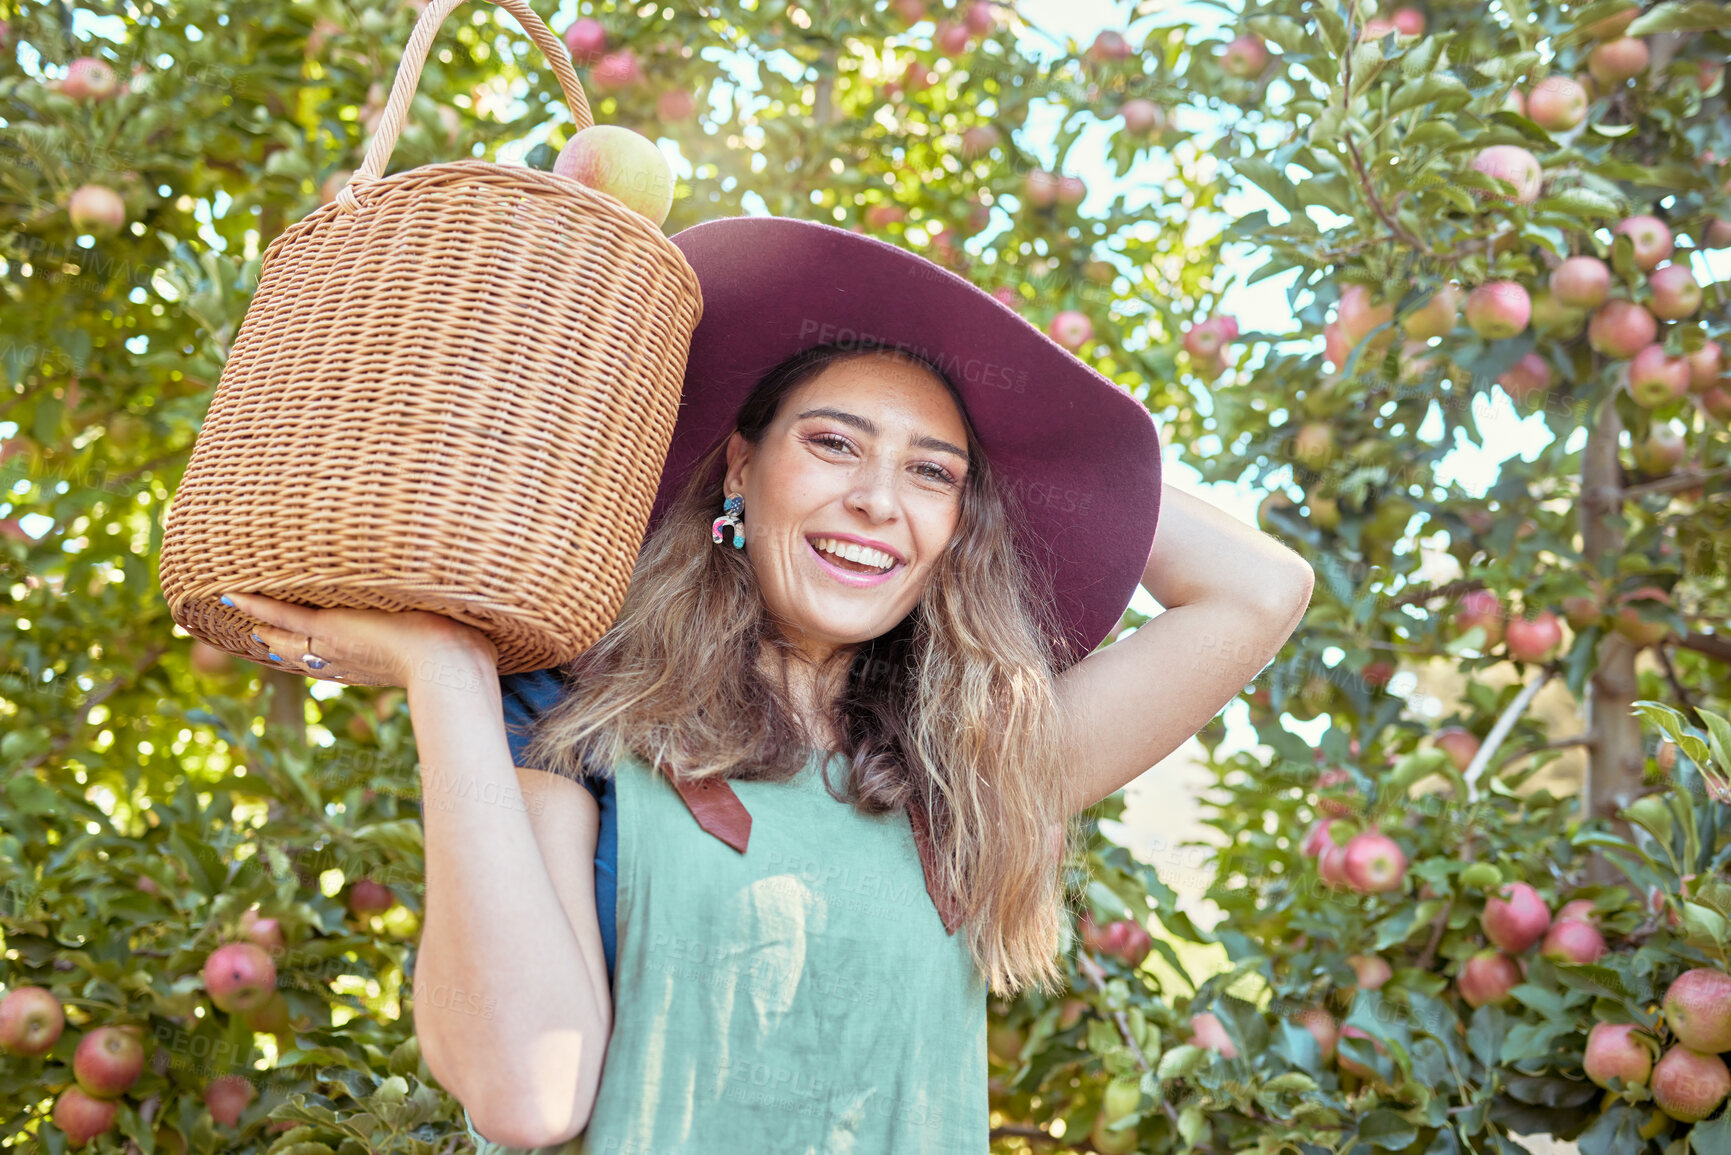 Buy stock photo Portrait of a happy farmer holding a basket of freshly picked apples in an orchard outside on a sunny day. Cheerful woman harvesting and gathering juicy, nutritious and organic fruit in summer season